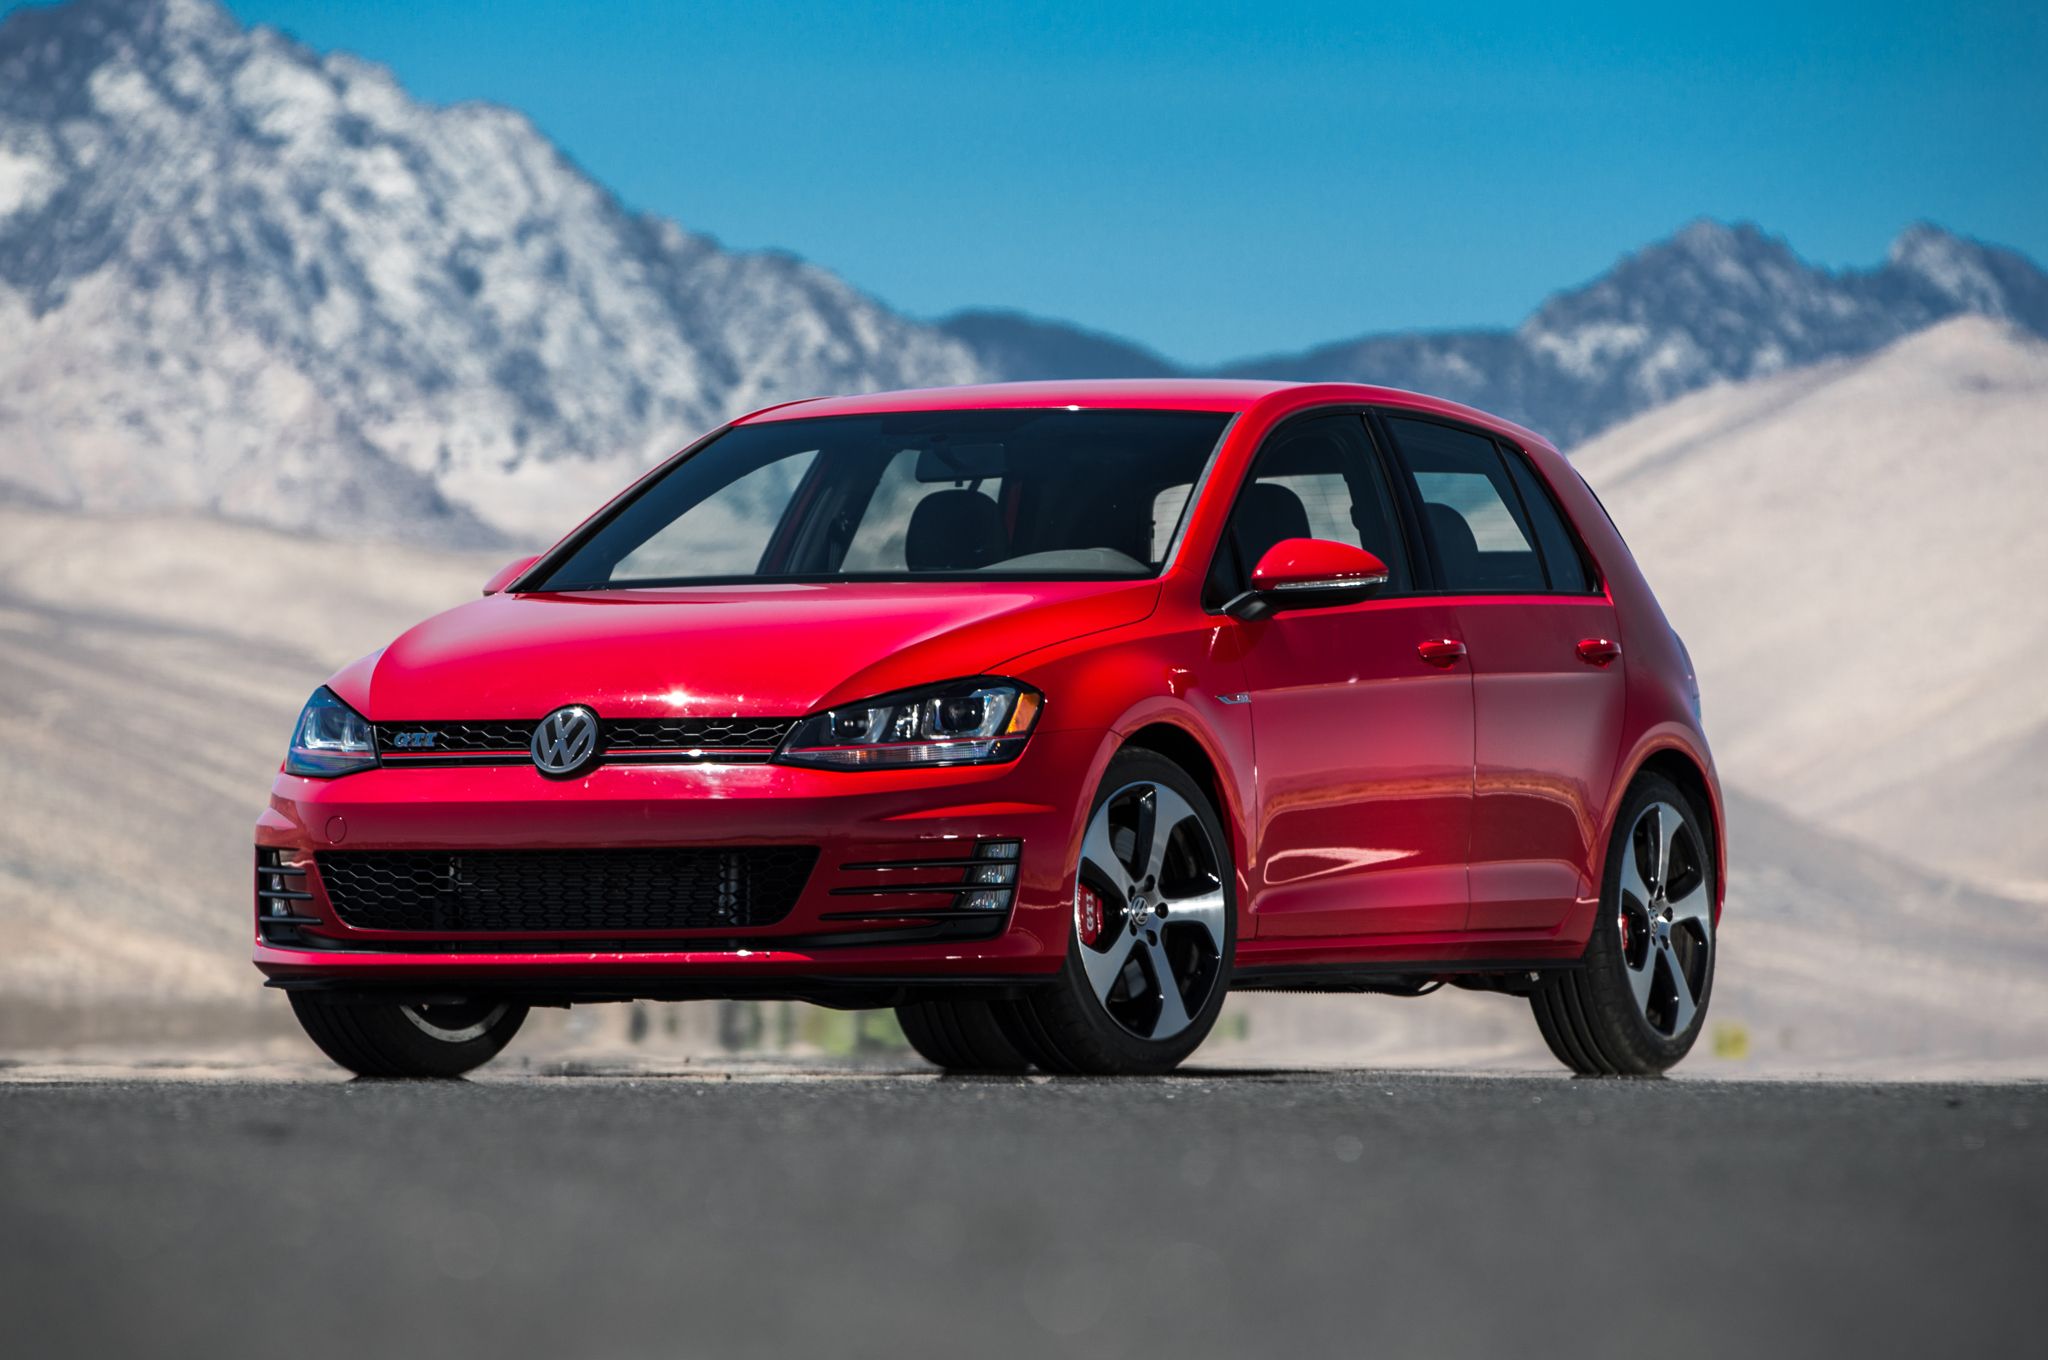 2015 Volkswagen Golf Gti Exterior Preview (View 16 of 55)